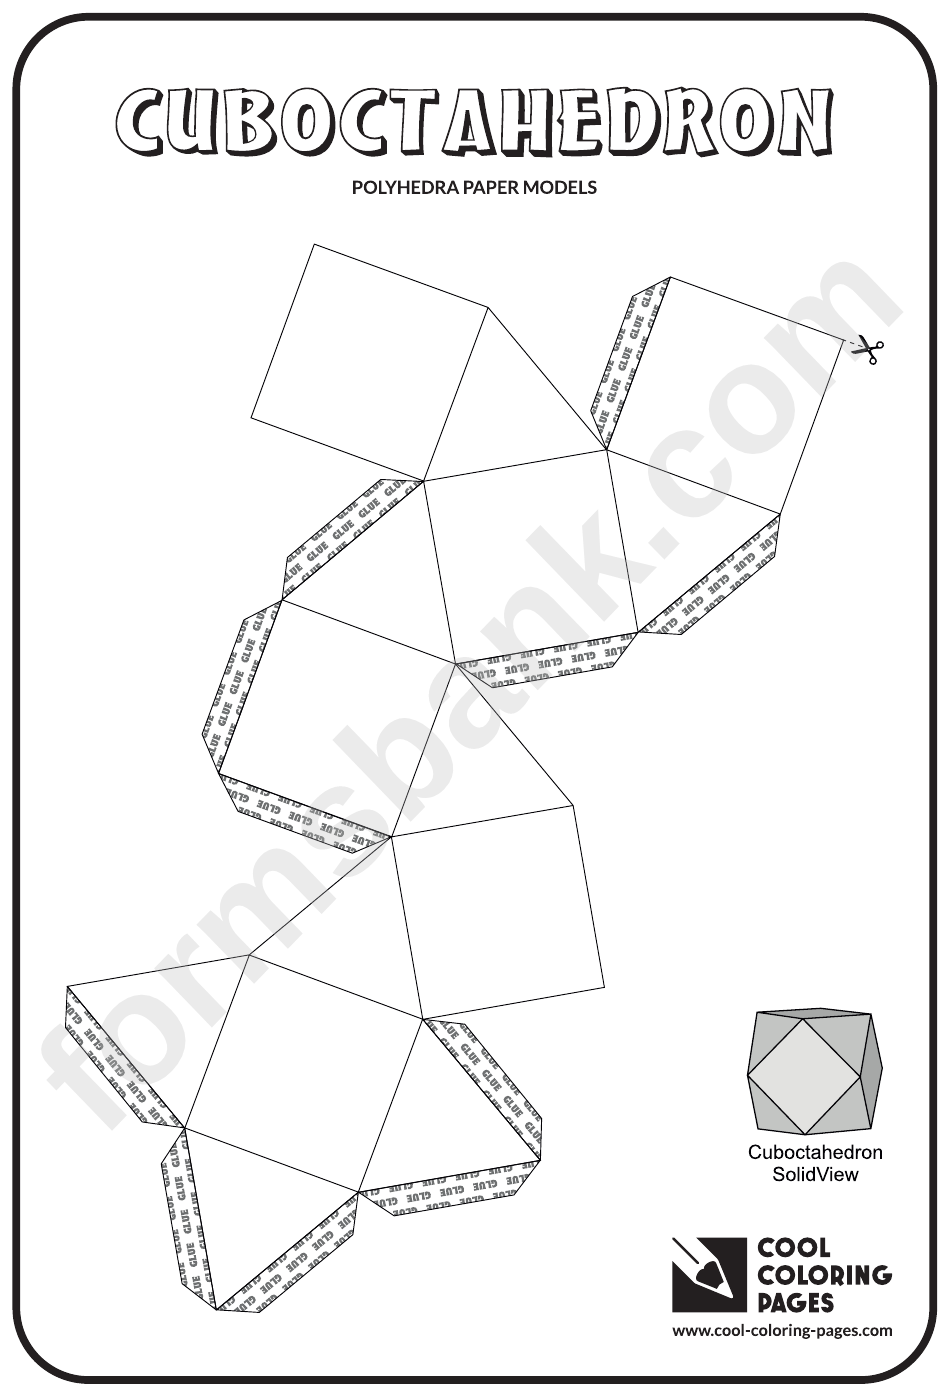 Polyhedra Cuboctahedron Model Template